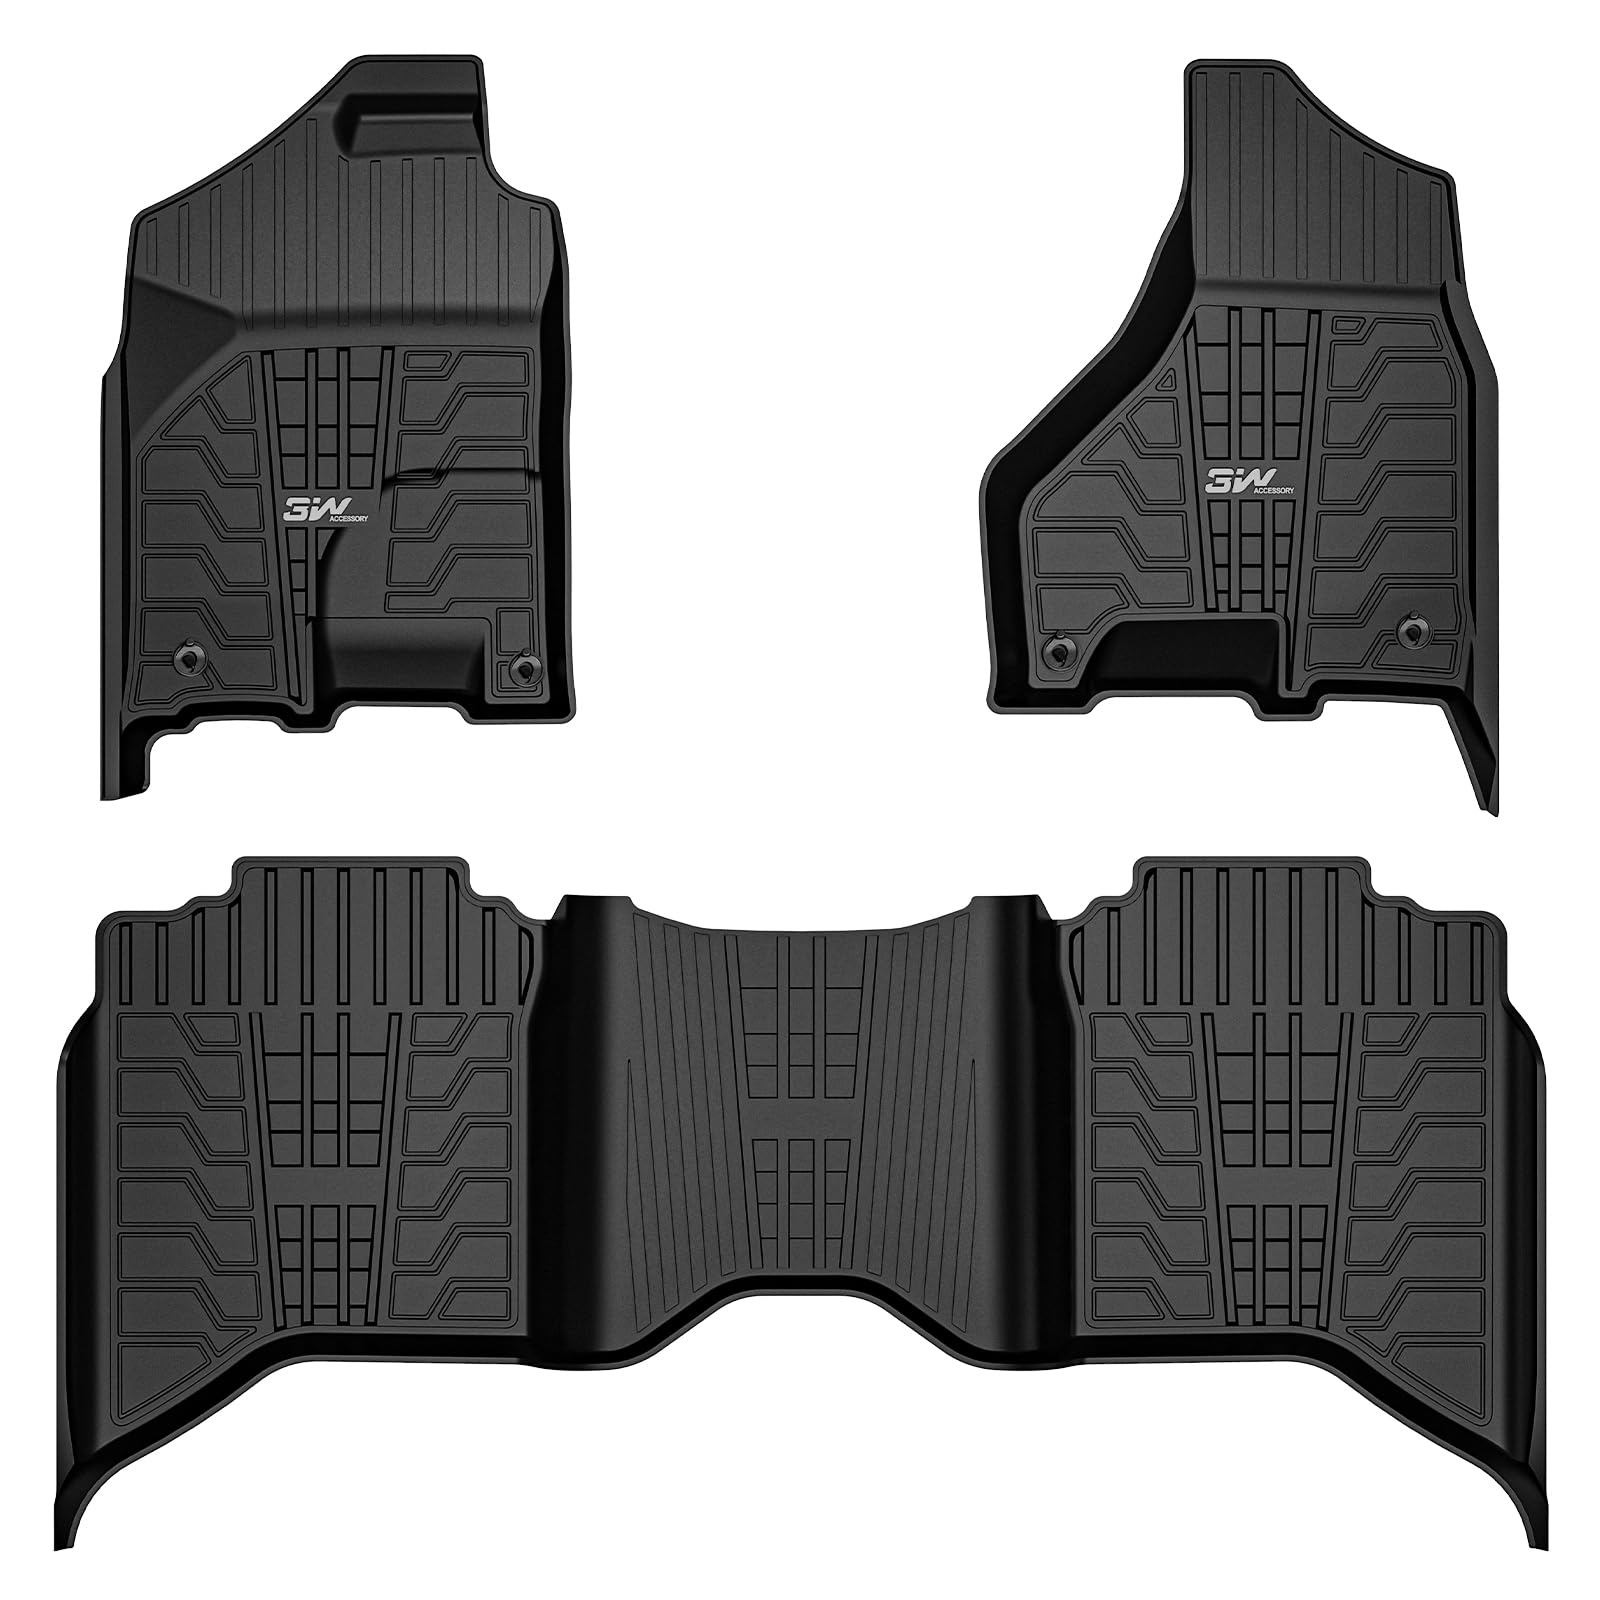 3W Dodge Ram 1500/2500/3500 2013-2018 (Not Quad cab) Without Storage Custom Floor Mats TPE Material & All-Weather Protection Vehicles & Parts 3W 2013-2018 Ram 1500 2013-2018 1st&2nd Row Mats